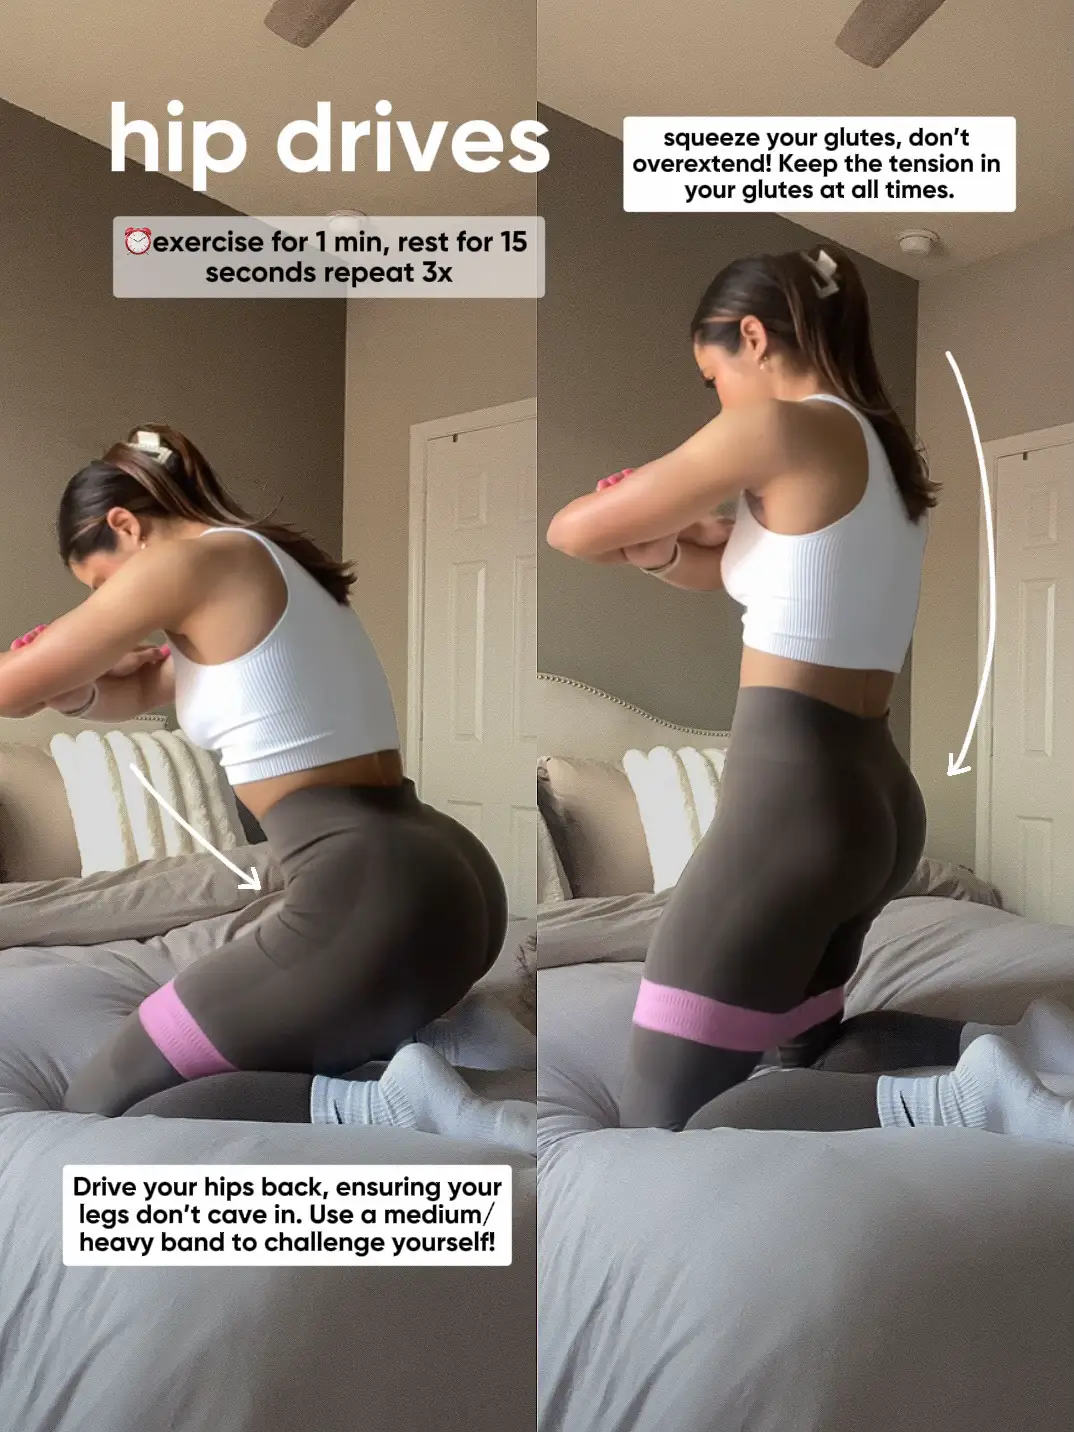 Lazy Girl Booty Circuit with Resistance Bands